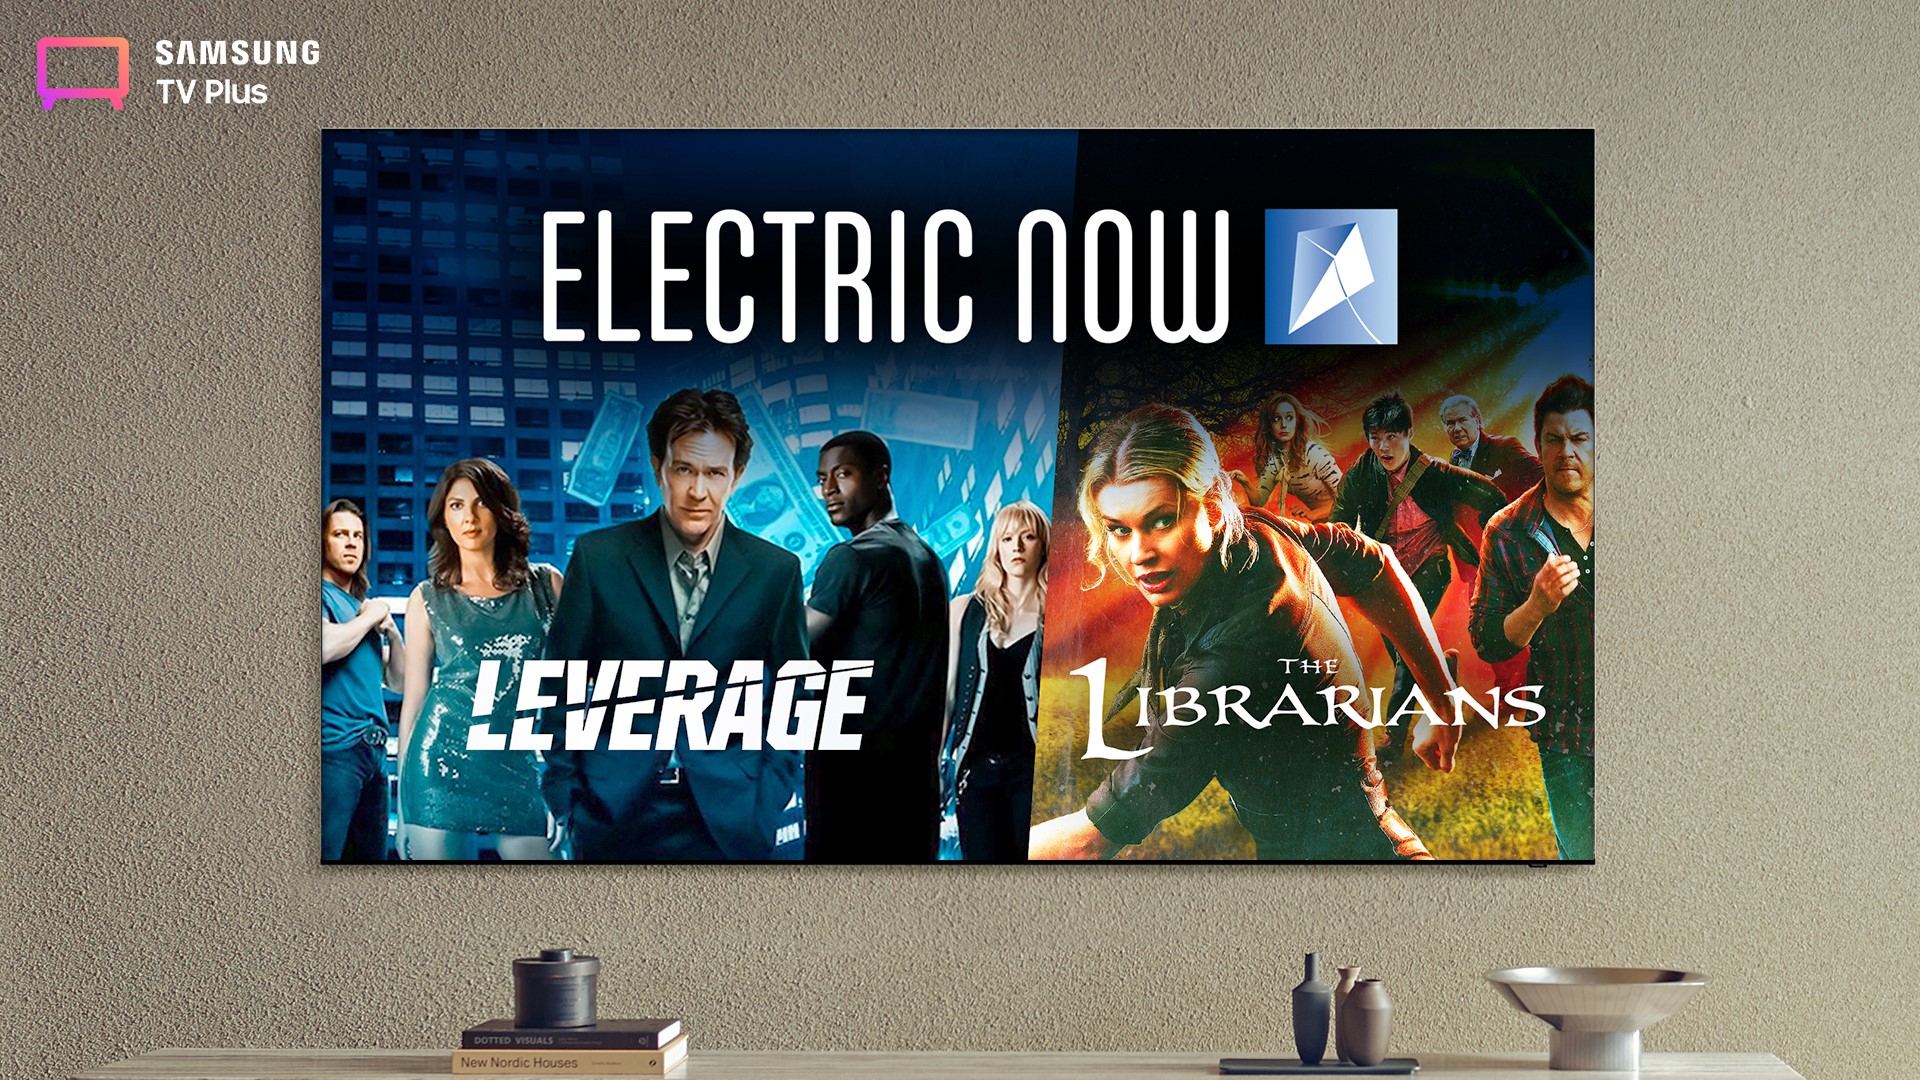 Samsung TV Plus Adds Channels Including Action-Oriented ElectricNow Next TV